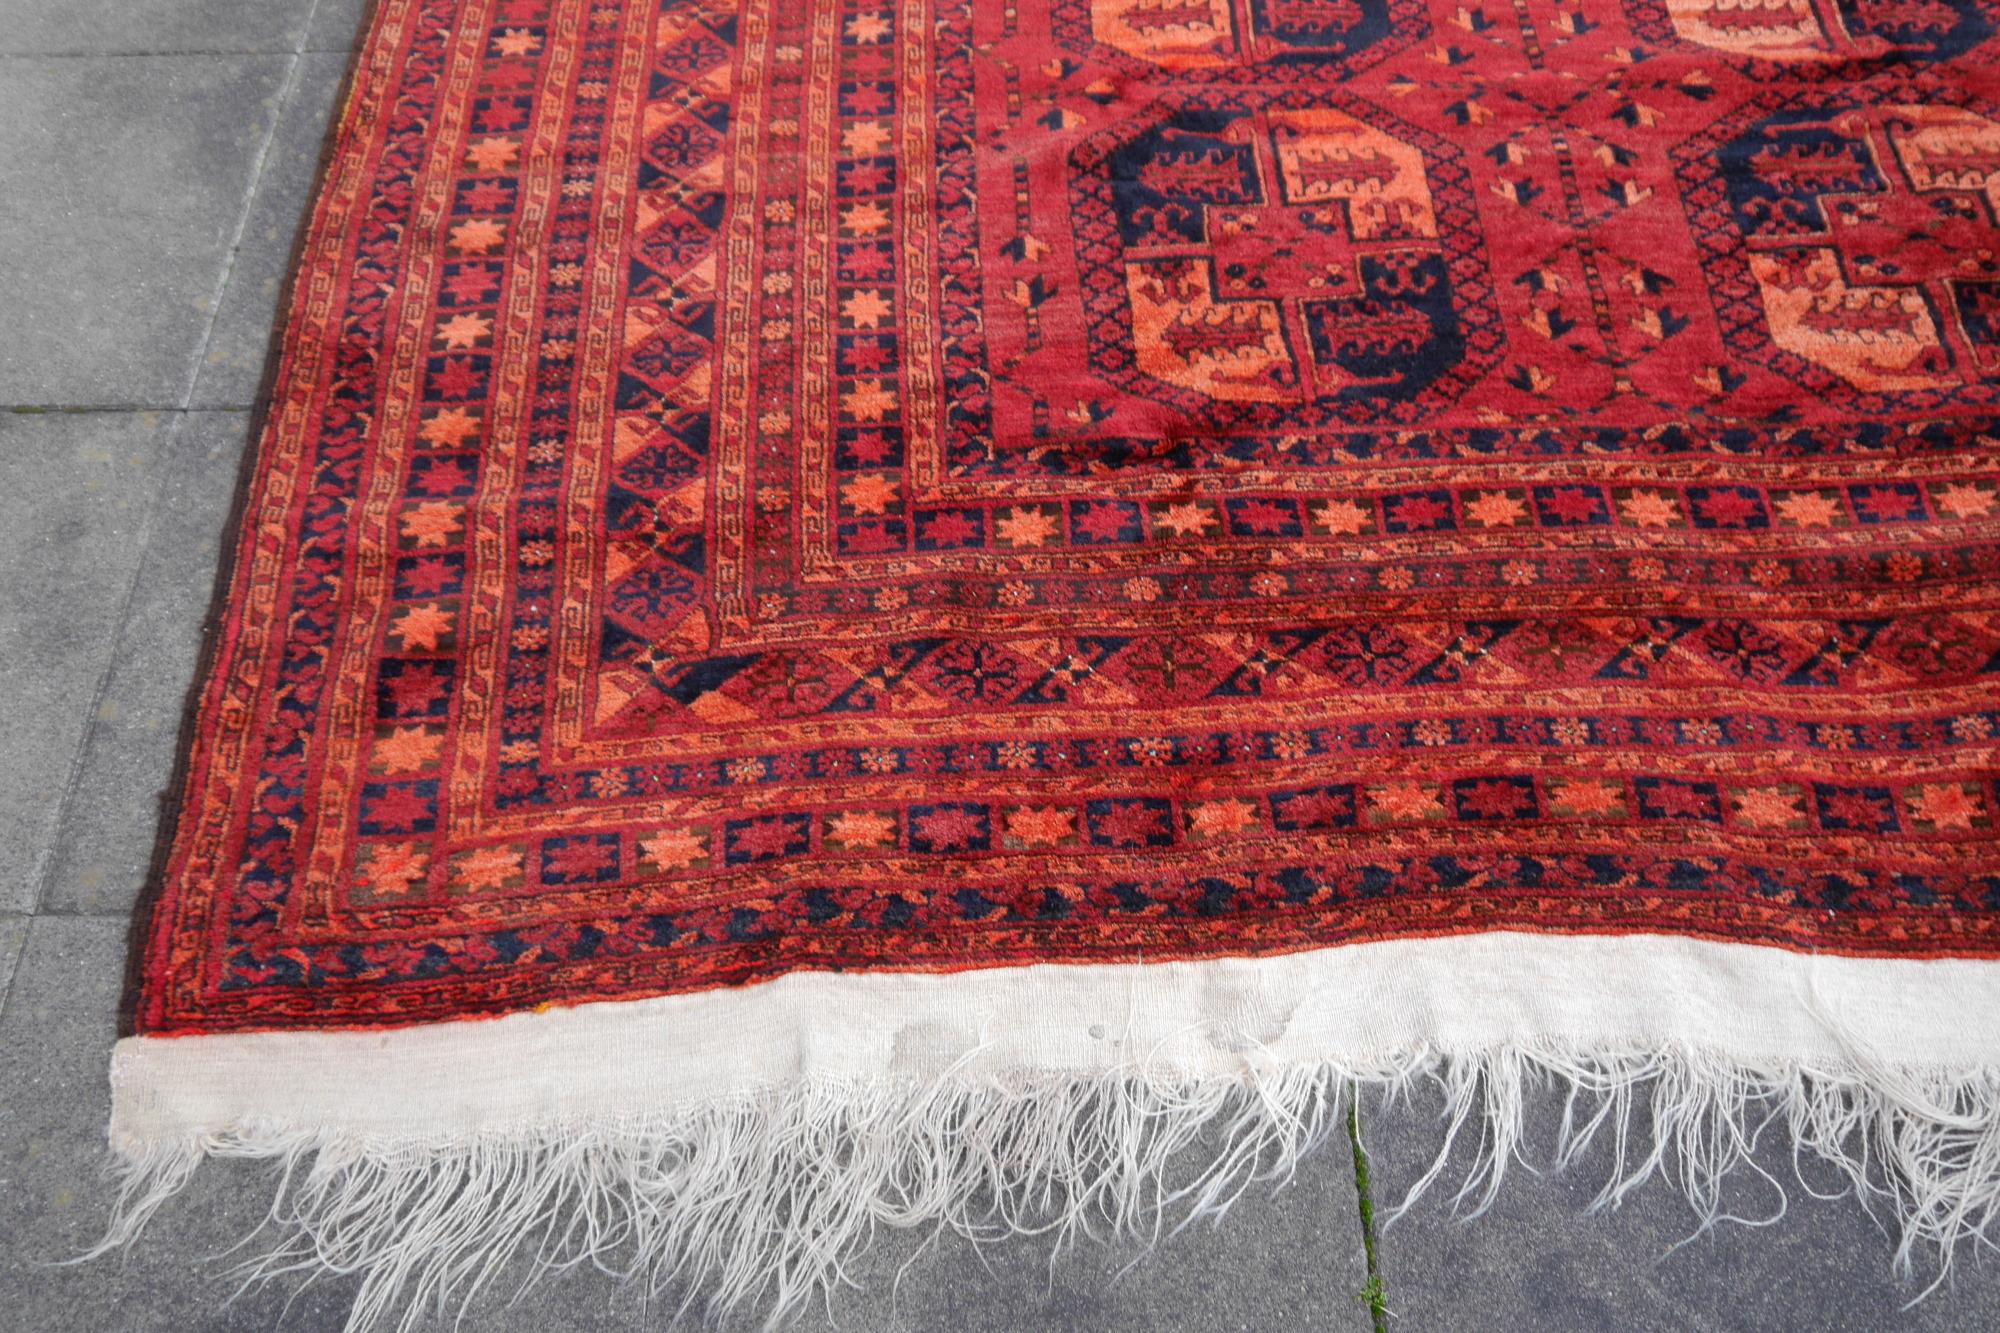 20th Century Ersari rug 11.2 x 15.5 ft oversized tribal Turkoman hand knotted antique carpet For Sale